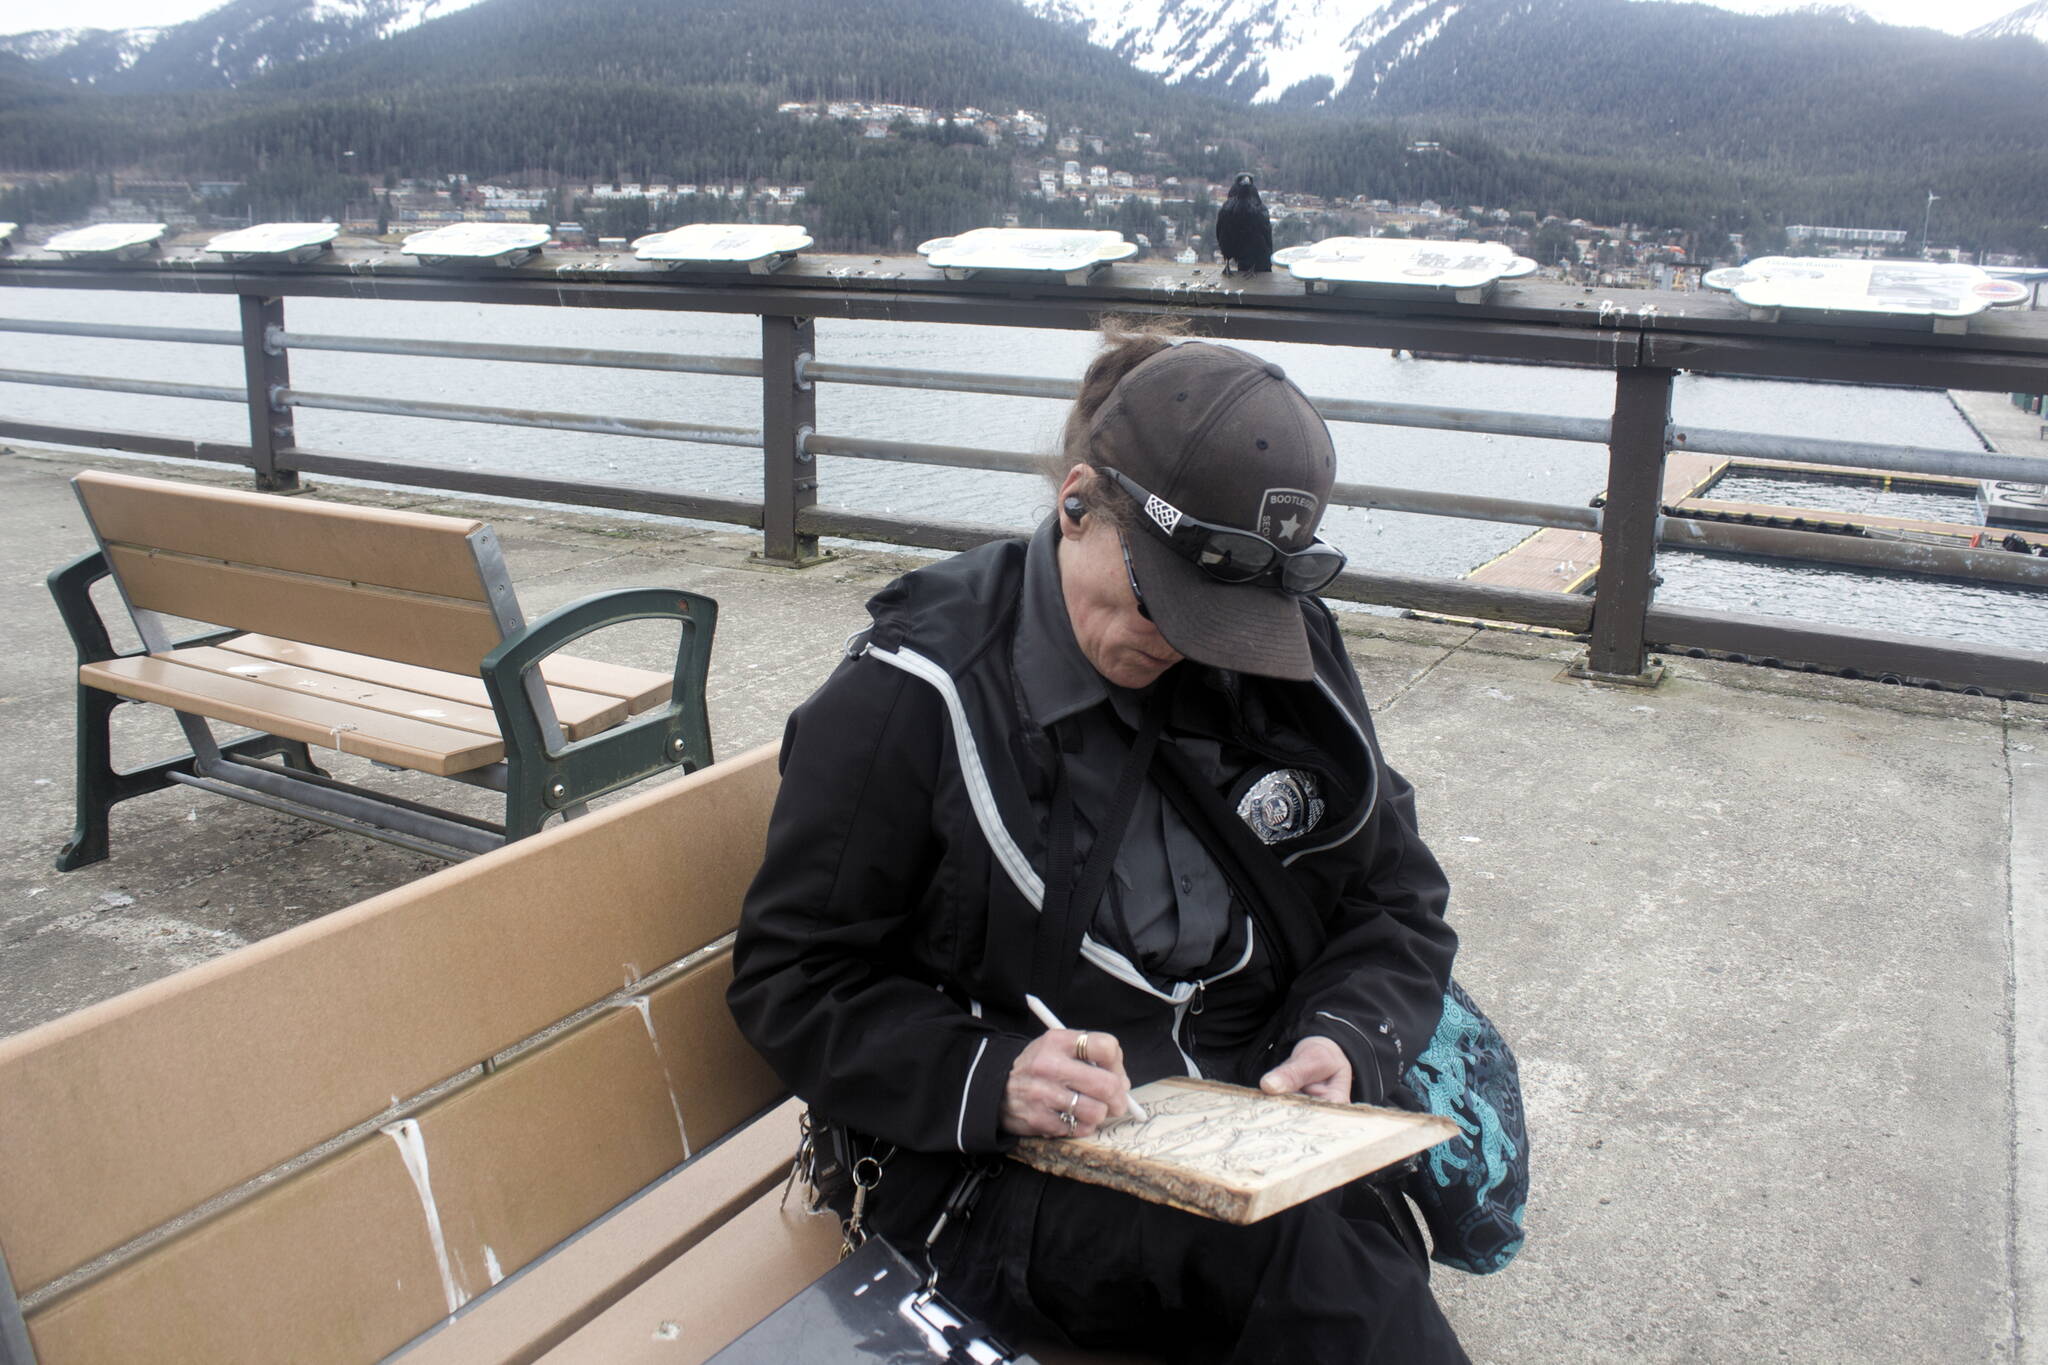 Amy Pervis, a private security officer who’s been a Juneau resident since 2000, sketches a heart and rose for a piece of woodburning art she hopes to sell to tourists this summer on the still mostly empty pier at Marine Park on Friday. (Mark Sabbatini / Juneau Empire)